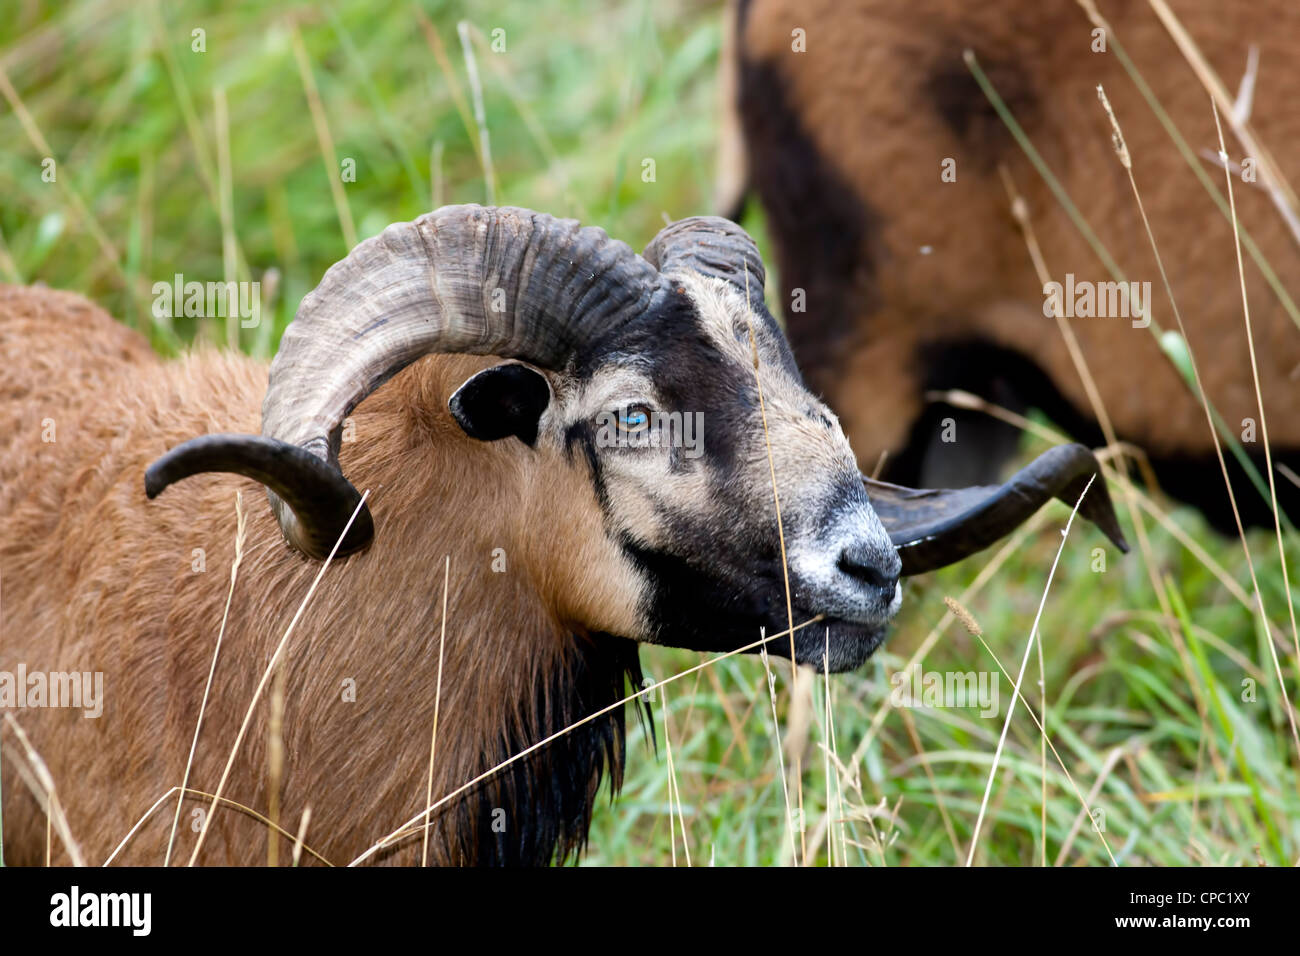 A close up portraiture of an American blackbellied sheep in the pasture. Stock Photo